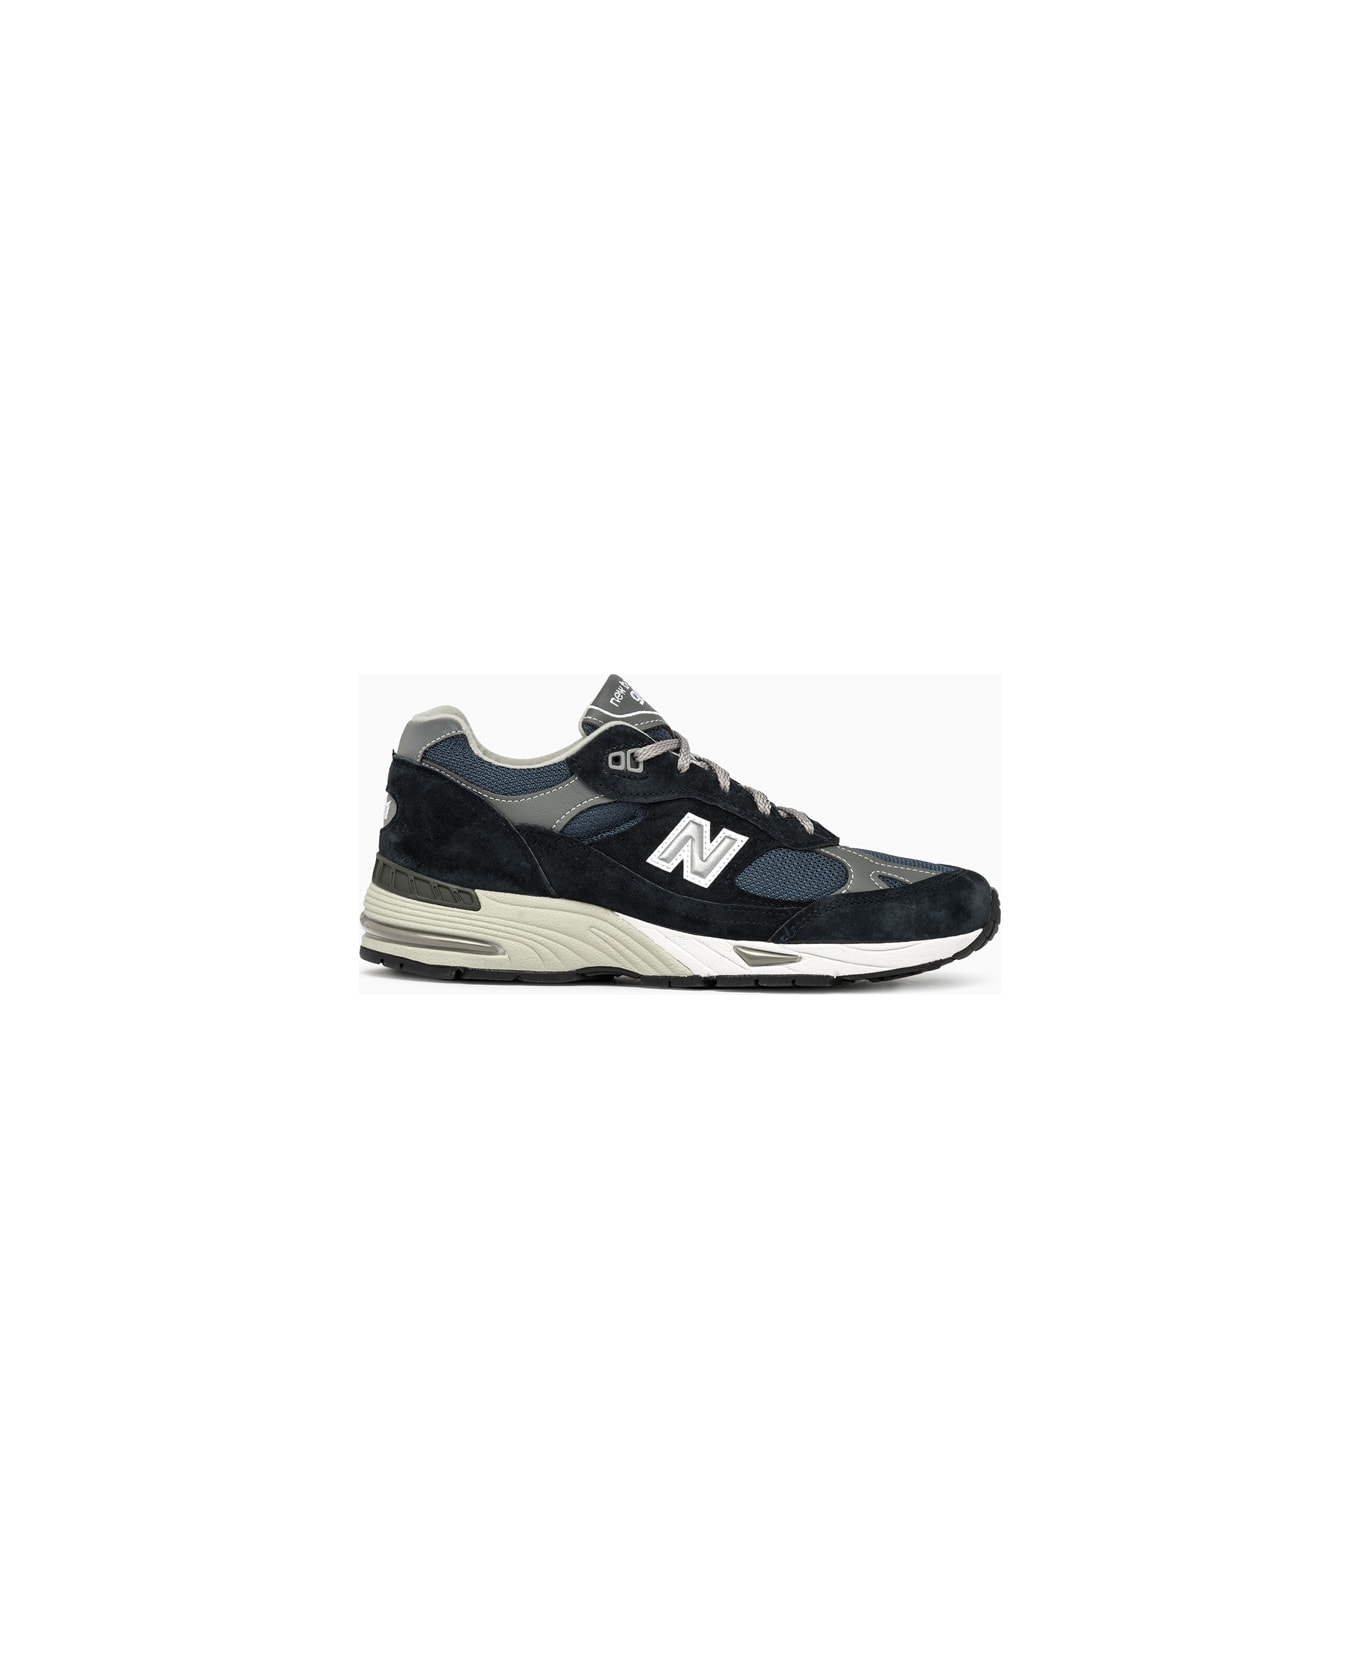 New Balance 991v1 Made In Uk Sneakers W991nv - Navy